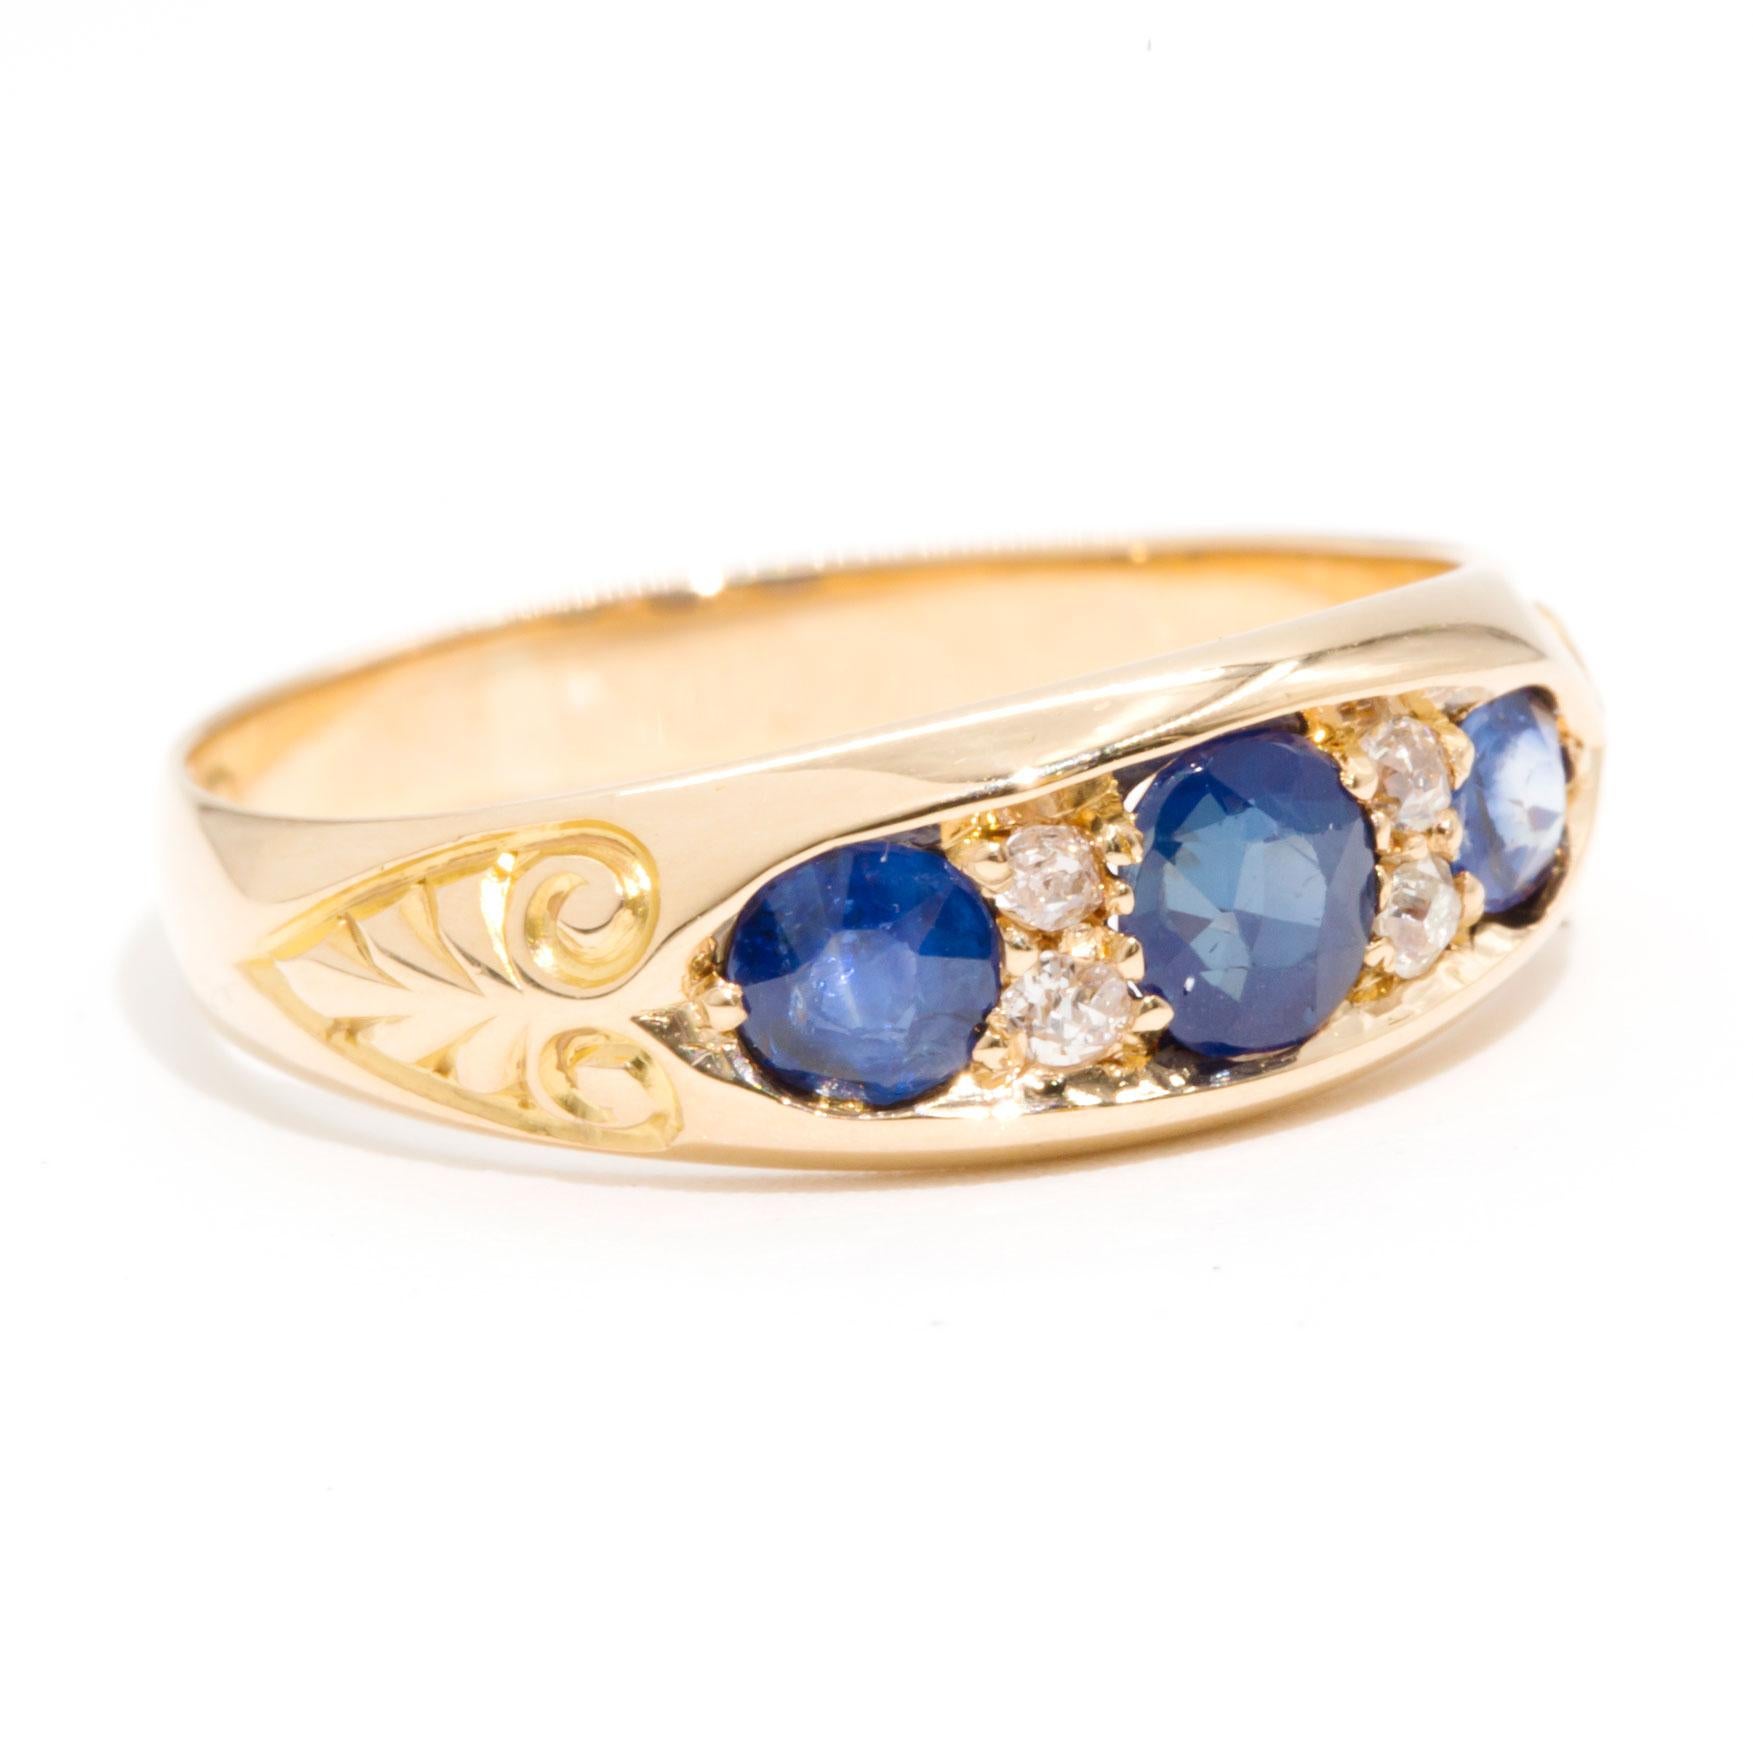 Forged in 18 carat yellow gold is this lovely vintage ring featuring three charming blue natural sapphires and four delightful old European cut diamonds set in a intricate patterned band. We have named this charming vintage ring The Venus Ring. The